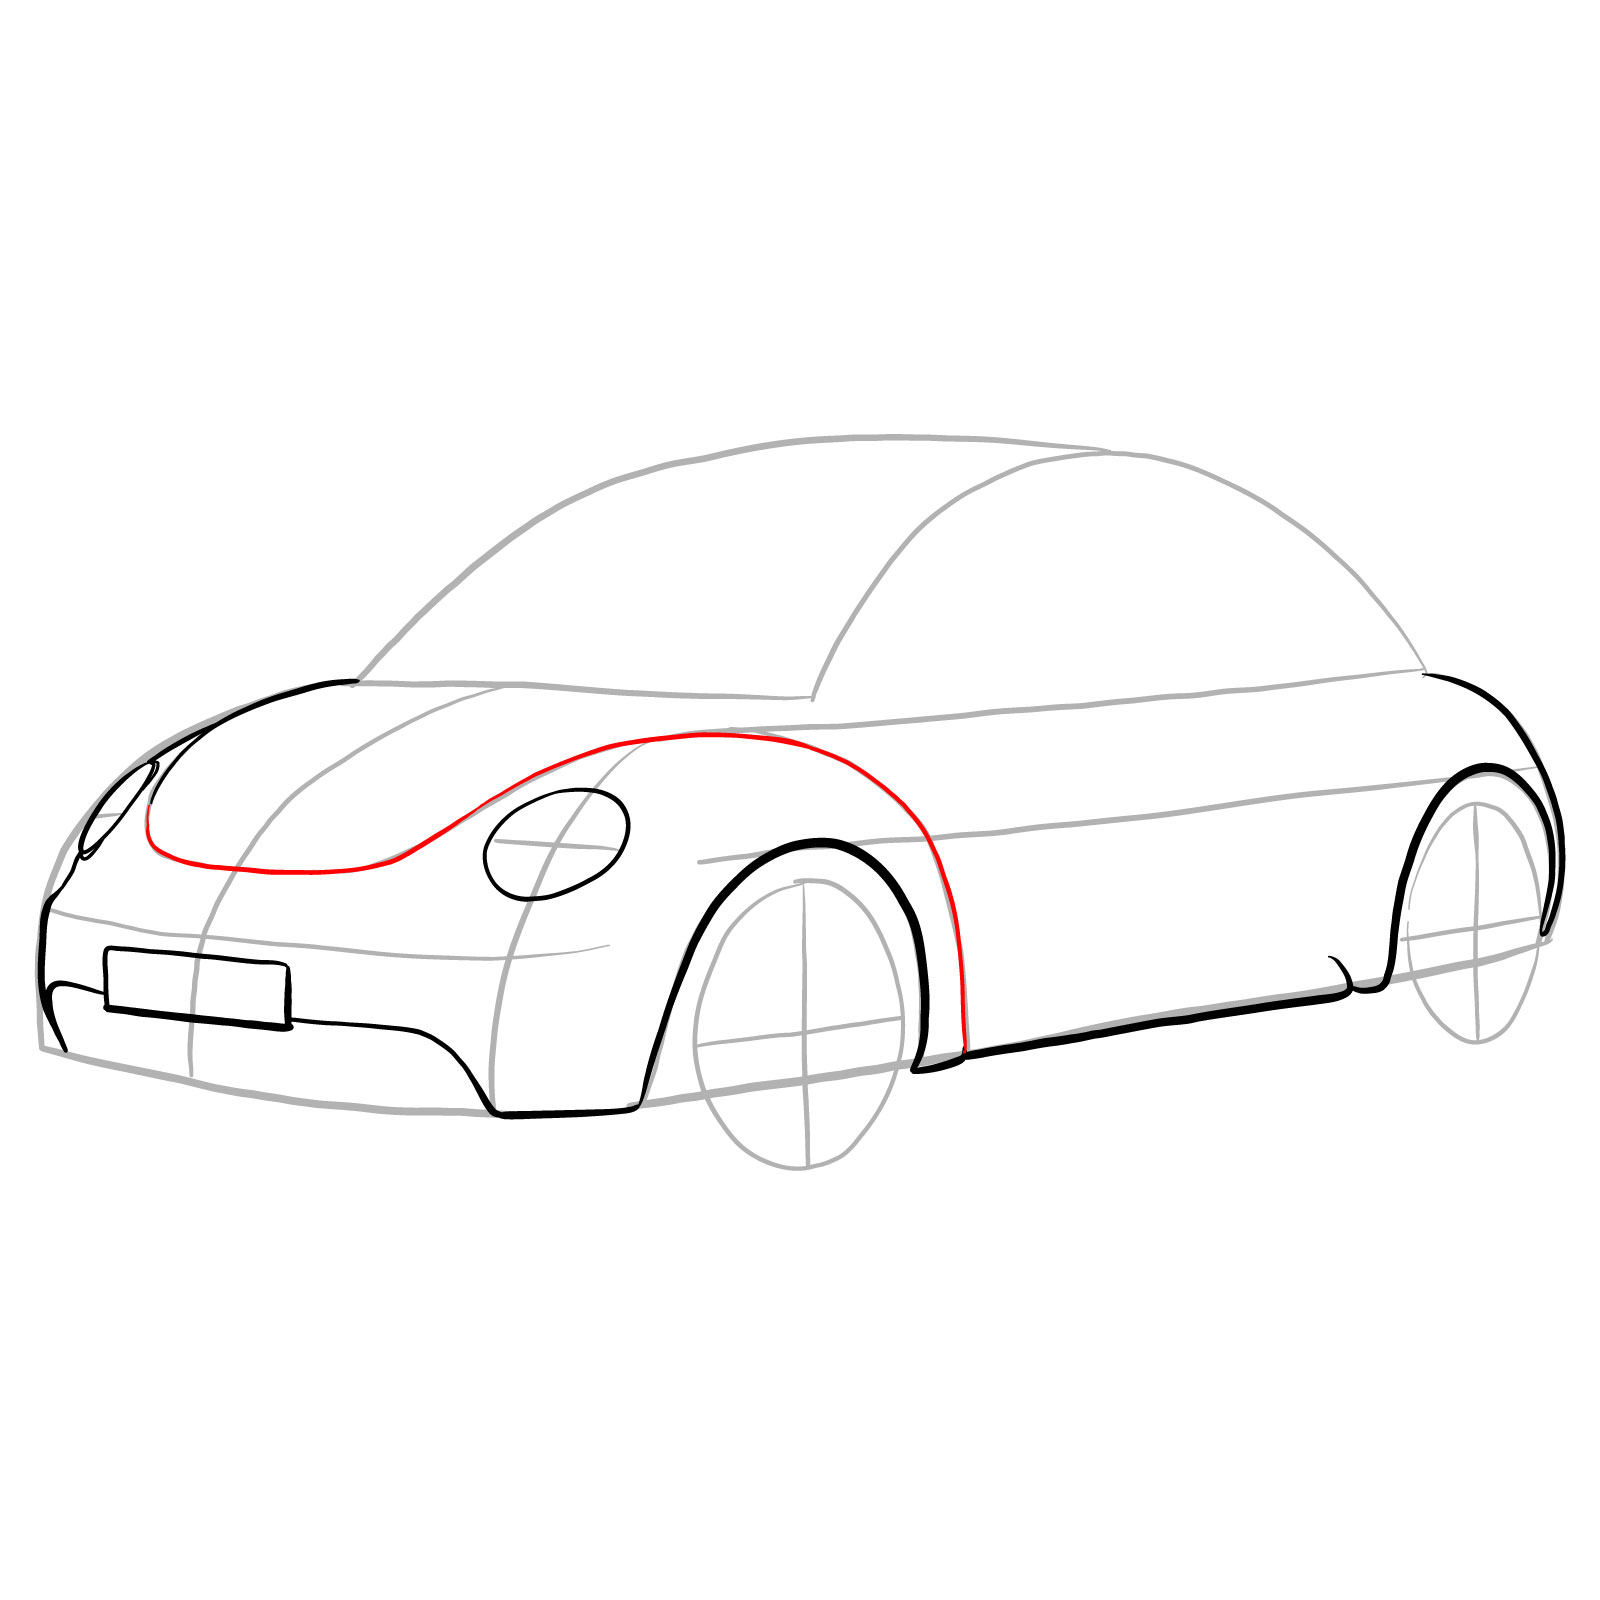 How to draw Volkswagen New Beetle - step 11